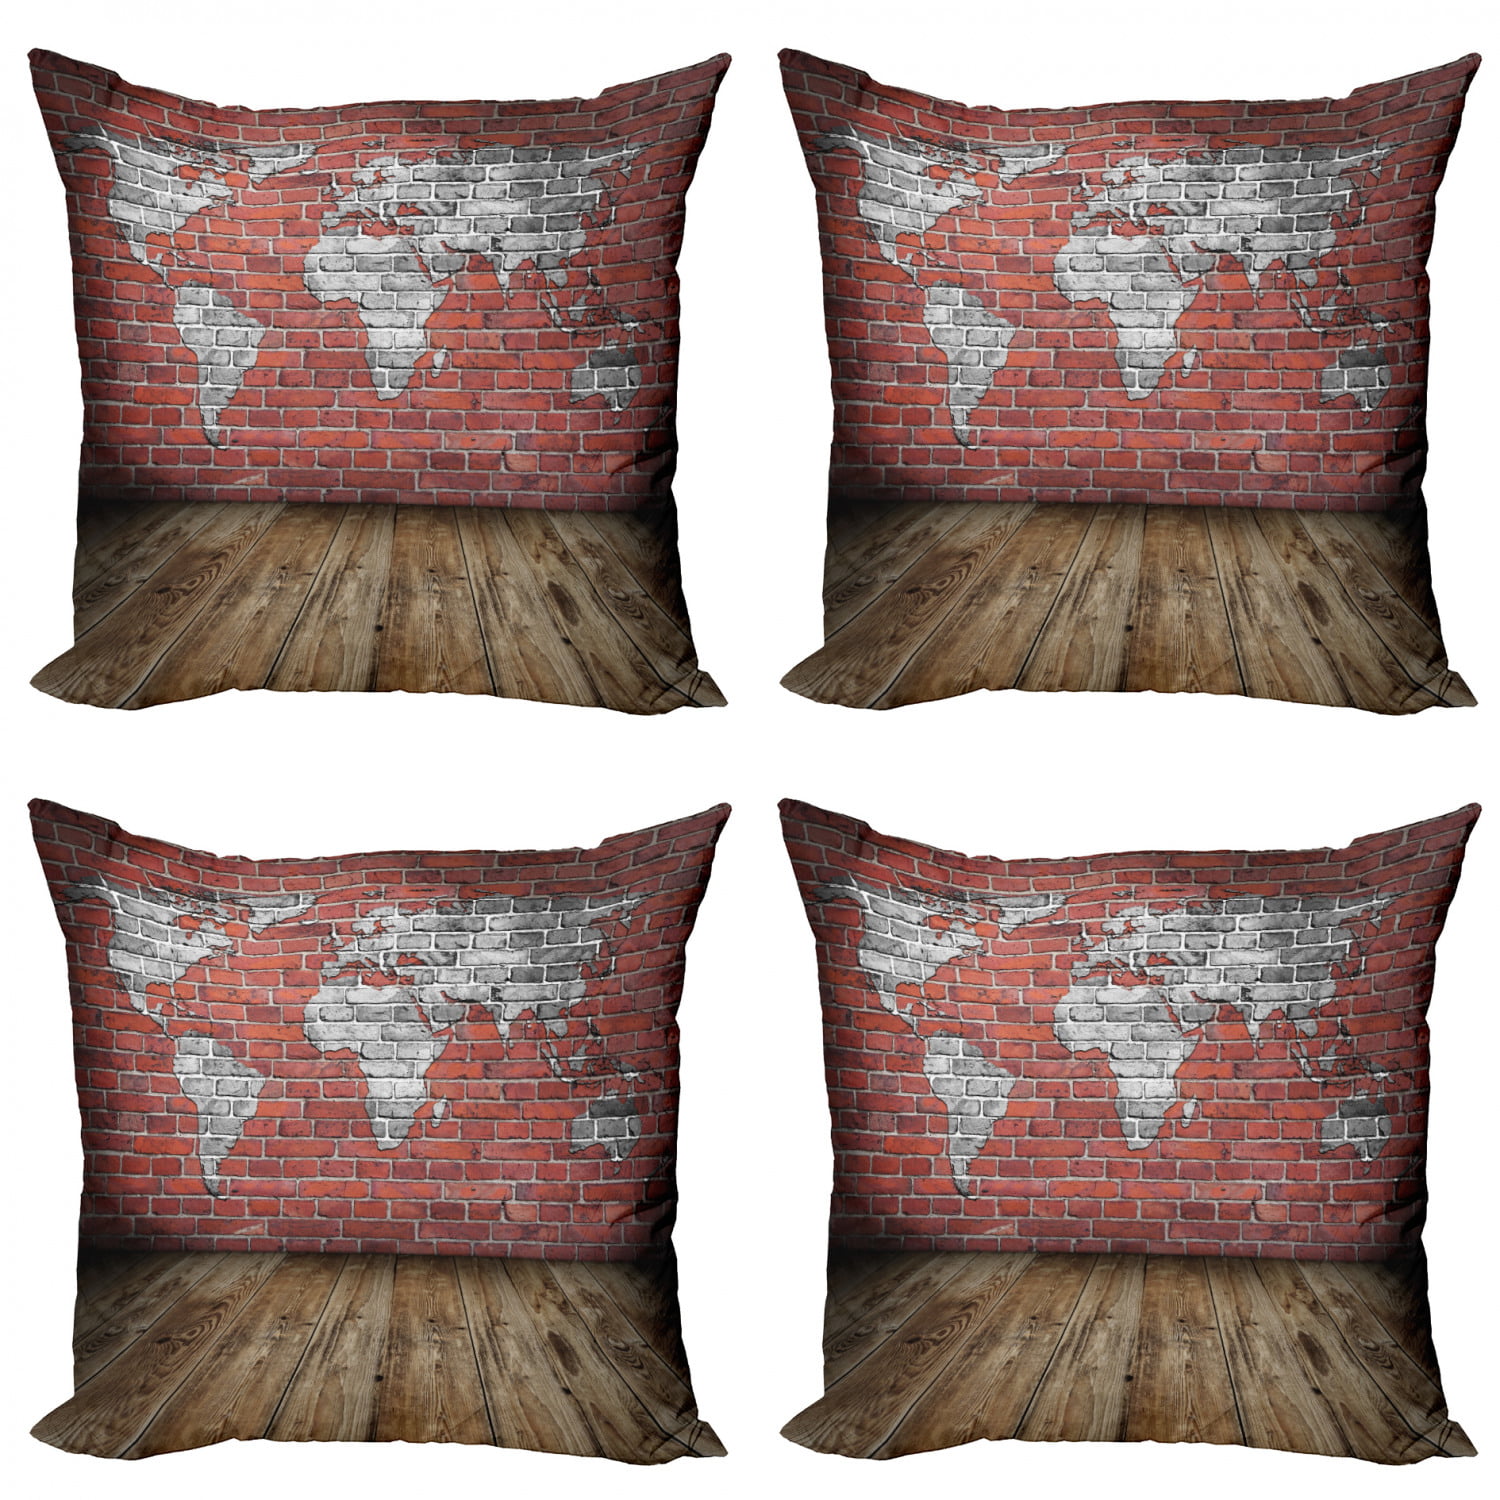 Ambesonne Wanderlust Throw Pillow Cushion Cover 16 X 16 inches Decorative Square Accent Pillow Case Grey and Red Vintage Old Grunge Map Room Style Brick Rustic Geographic Interior Travel